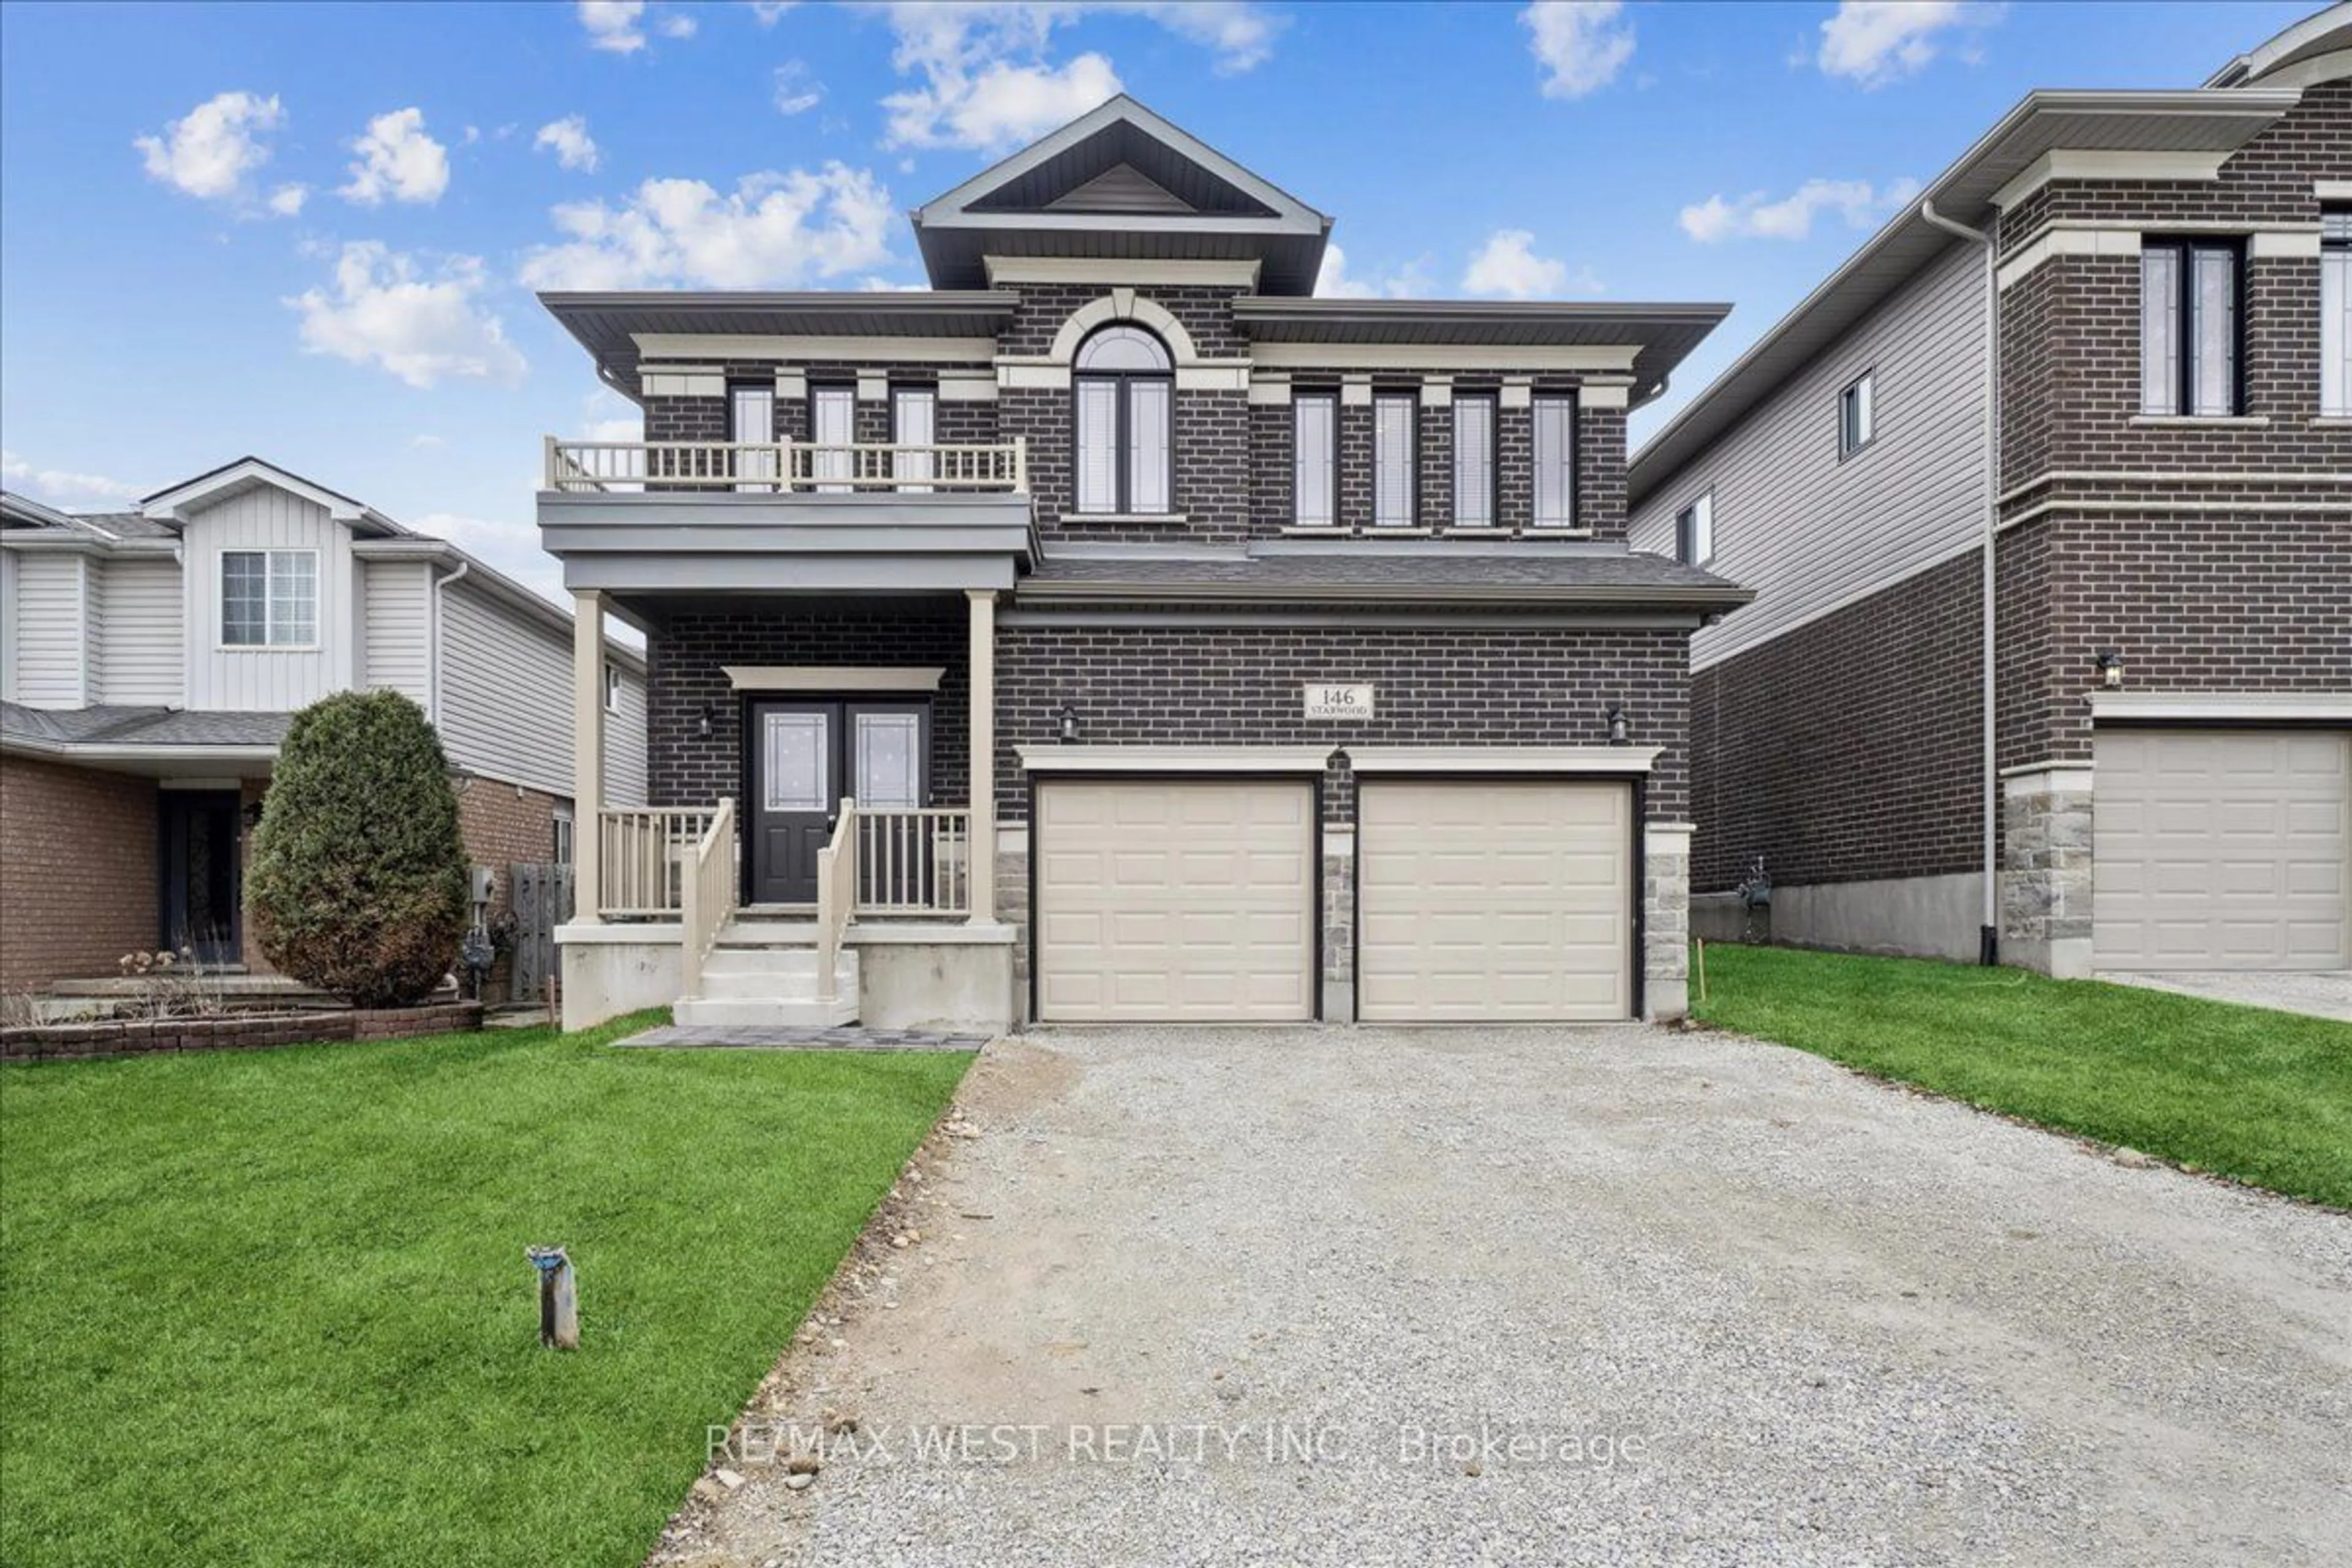 Frontside or backside of a home for 146 Starwood Dr, Guelph Ontario N1E 7G7